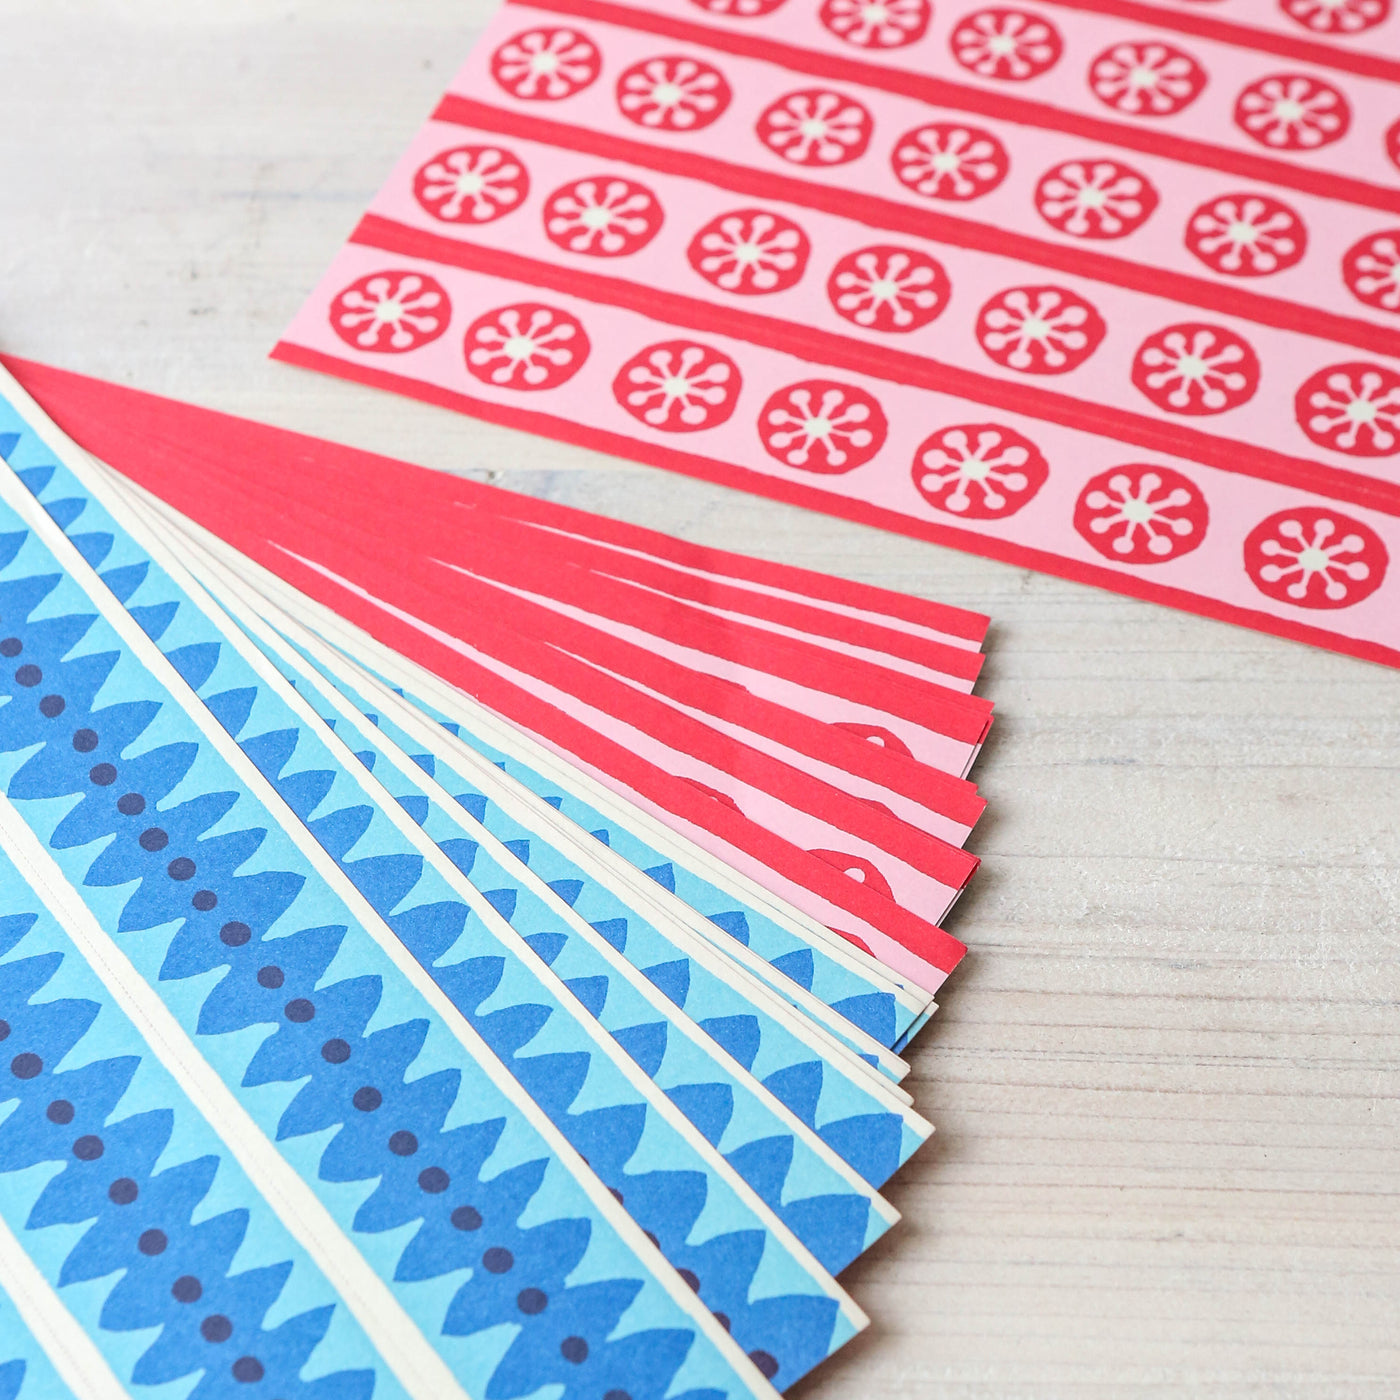 Cambridge Imprint Blue and Red Paperchain Kit